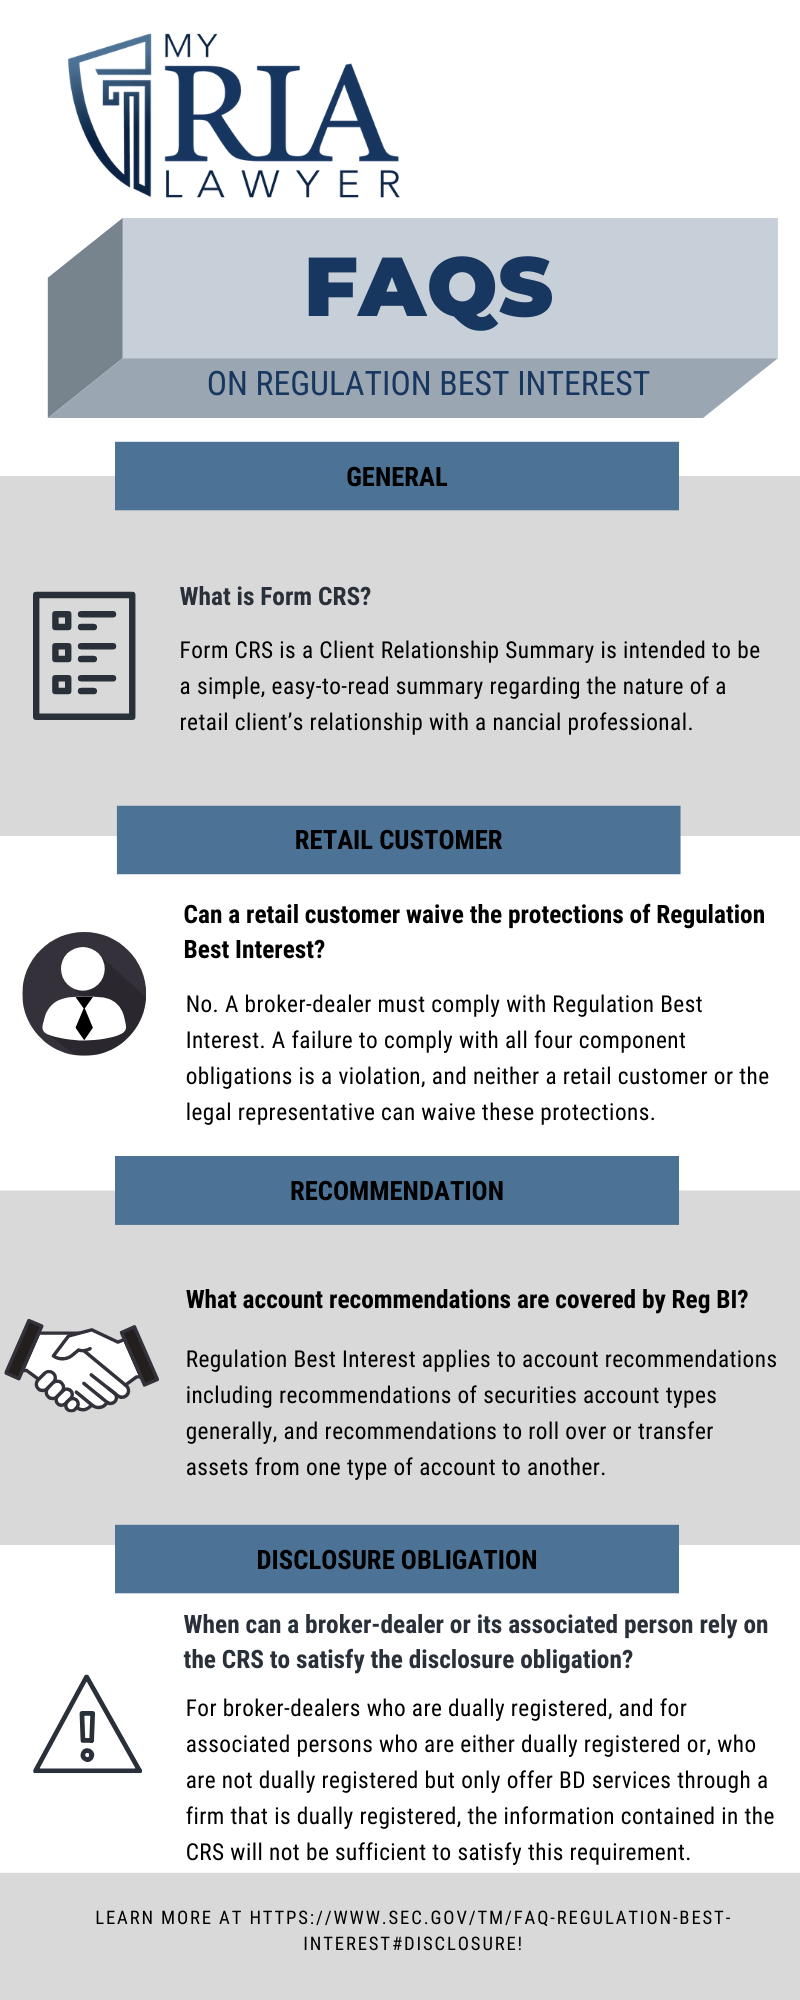 An infographic providing FAQs on Regulation Best Interest. It covers general information on Form CRS, whether retail customers can waive the protections, account recommendations covered under Reg BI, and when the Client Relationship Summary (CRS) is insufficient to satisfy disclosure obligations for broker-dealers and associated persons.